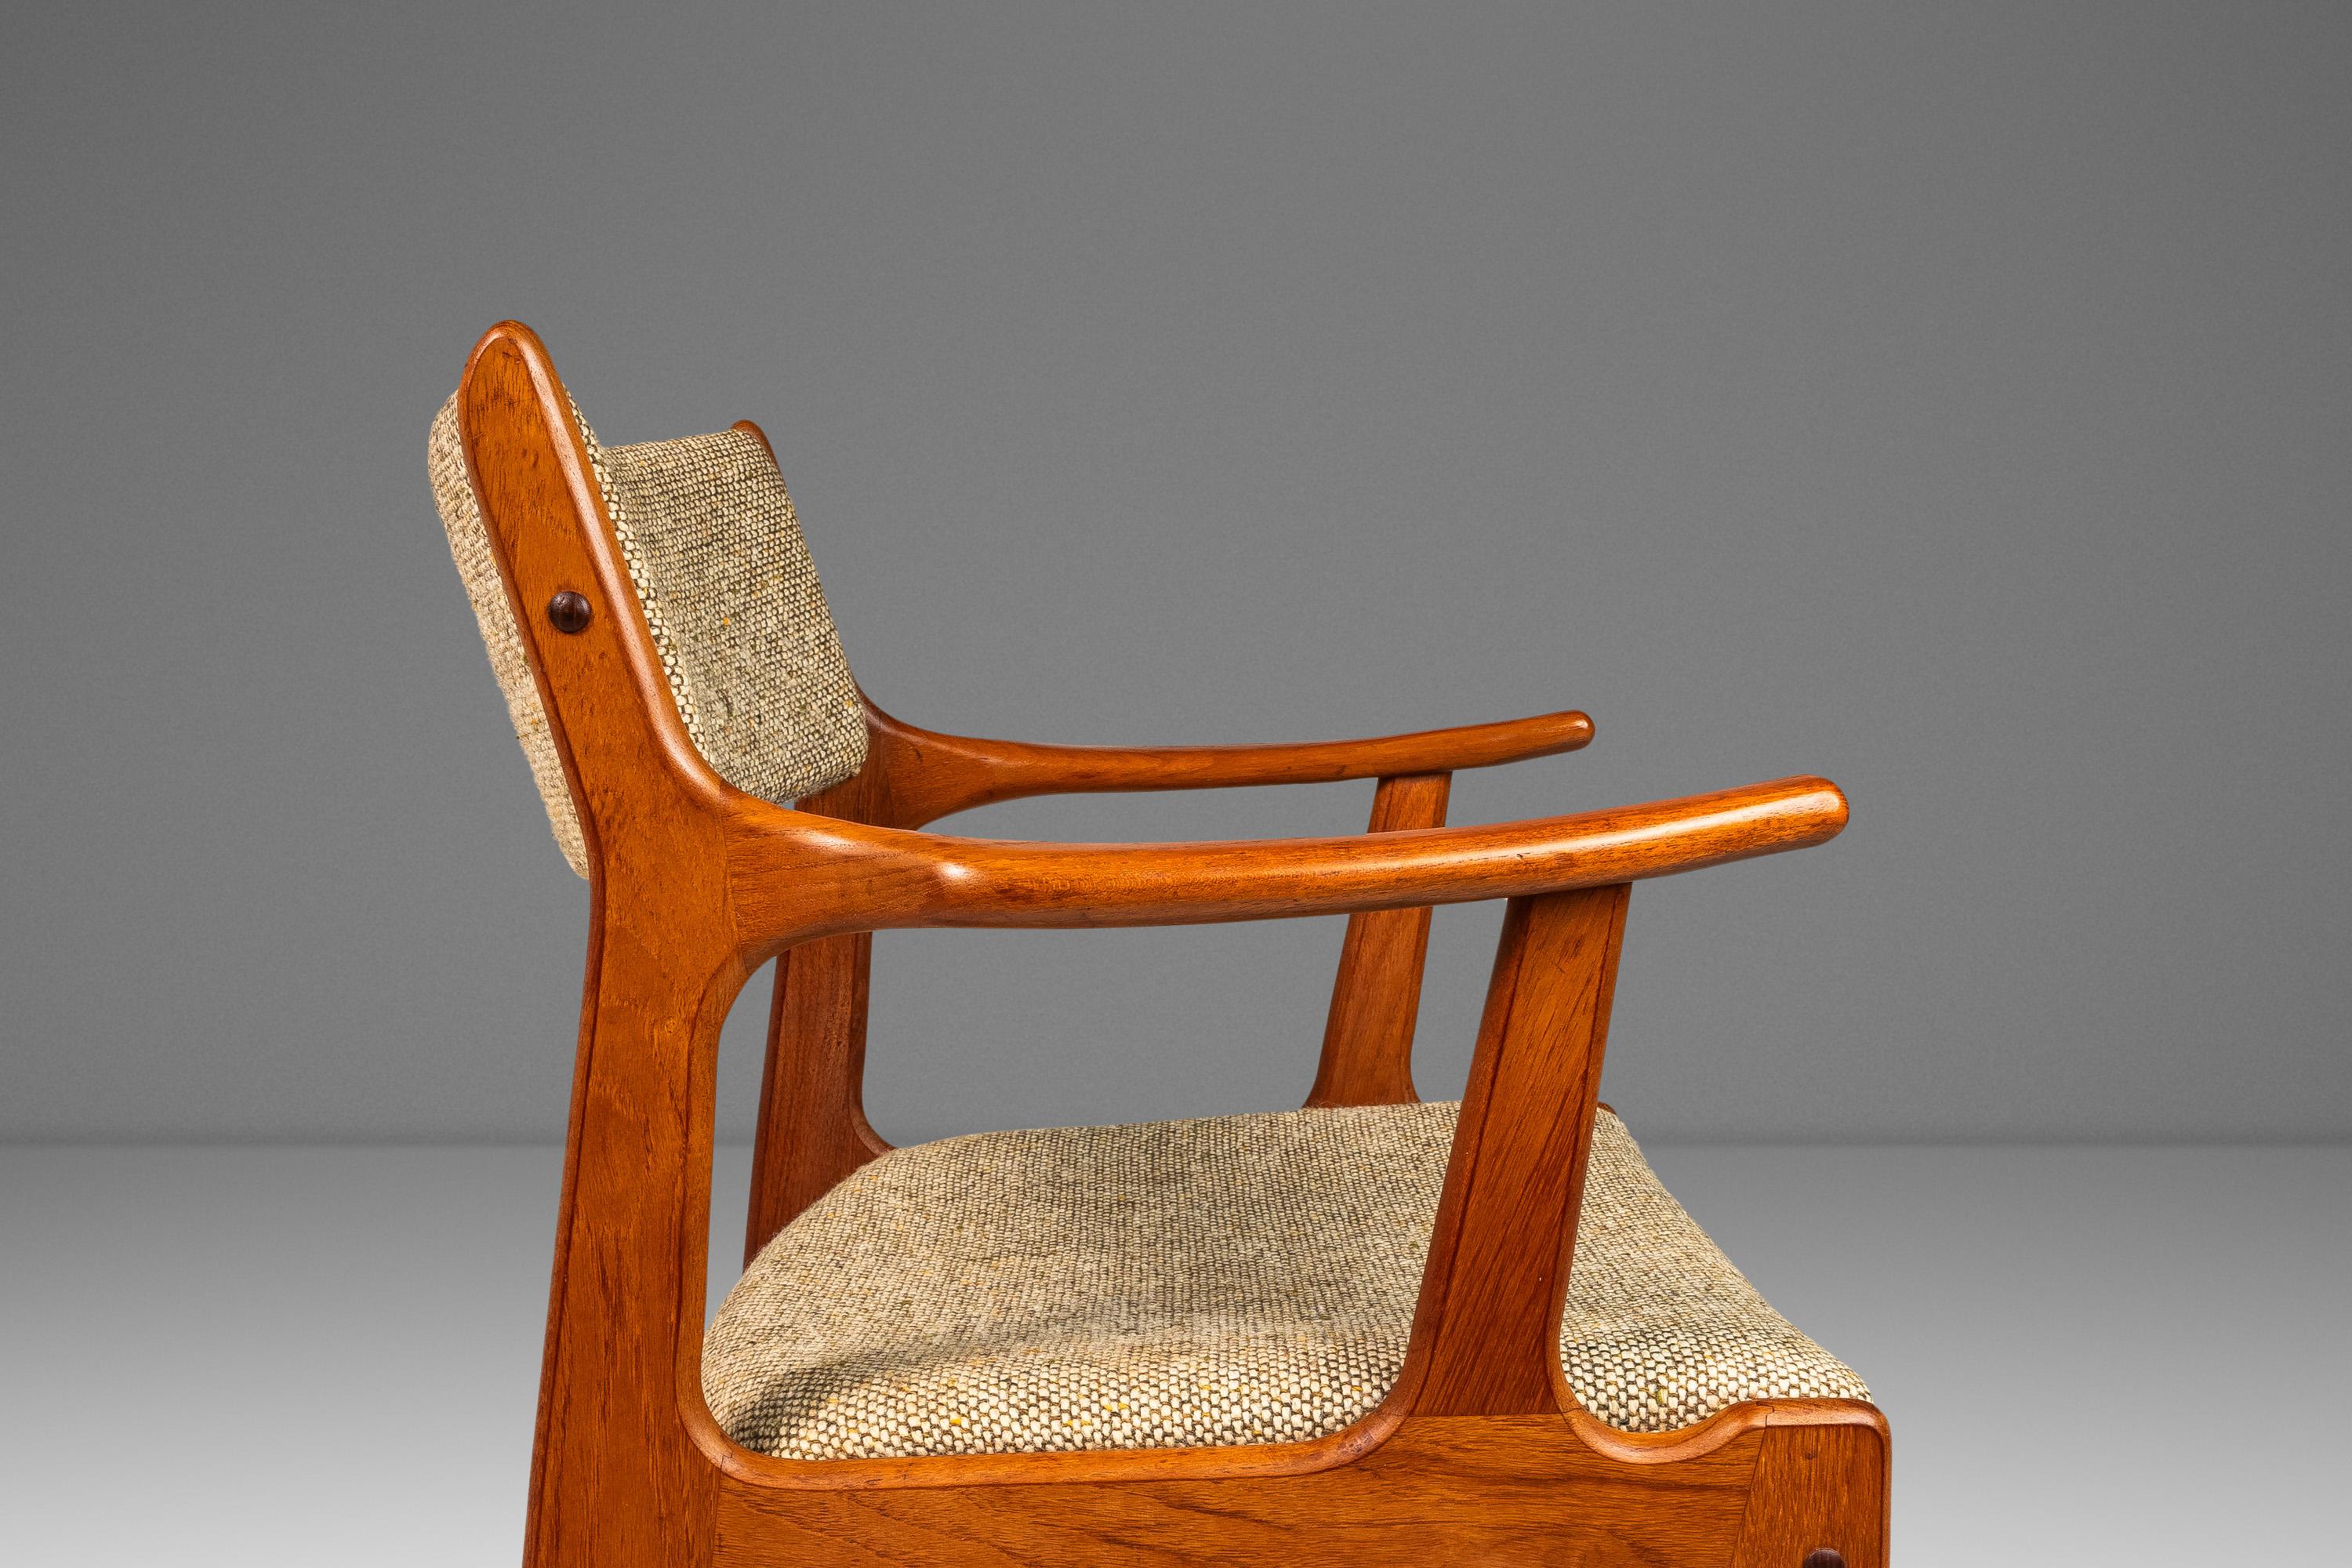 Danish Mid-Century Arm Chair in Solid Teak & Original Fabric by D-Scan, c. 1970s For Sale 8